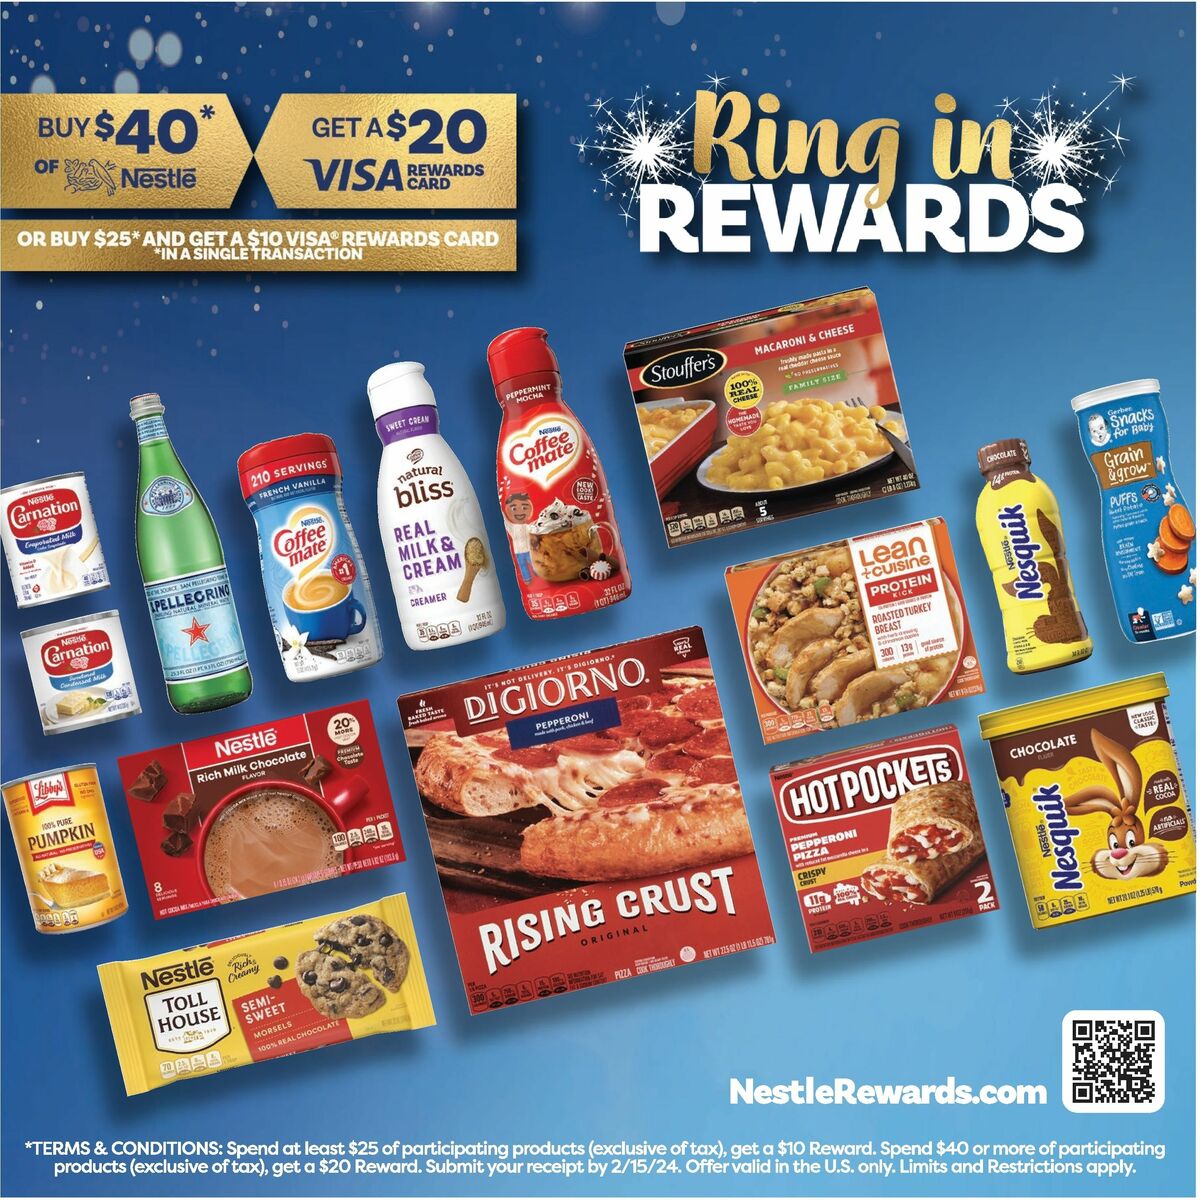 Fareway Weekly Ad from January 8